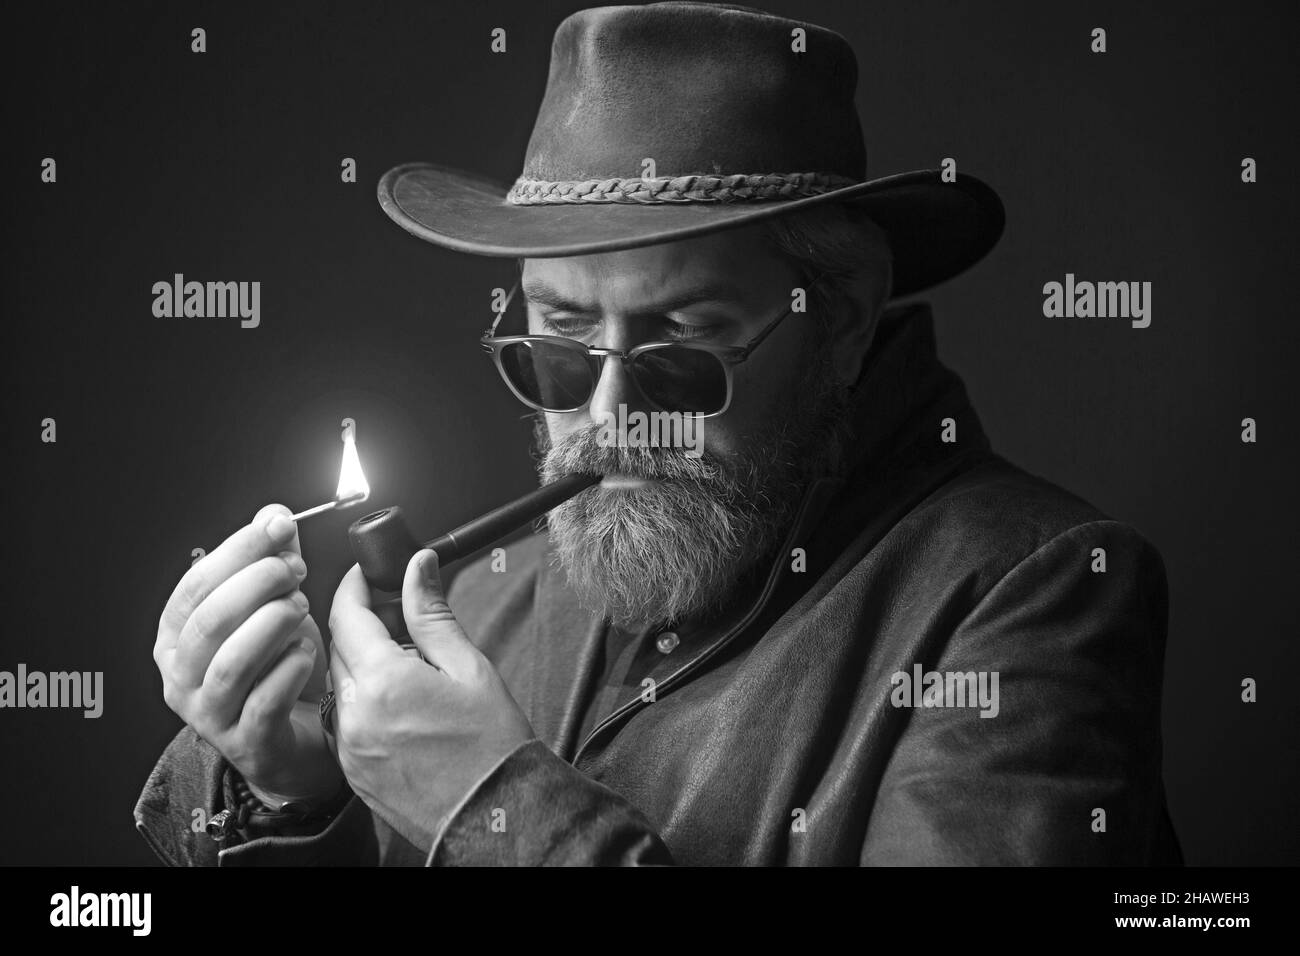 Cool cowboy in leather Jacket with pipe over dark background. Stock Photo